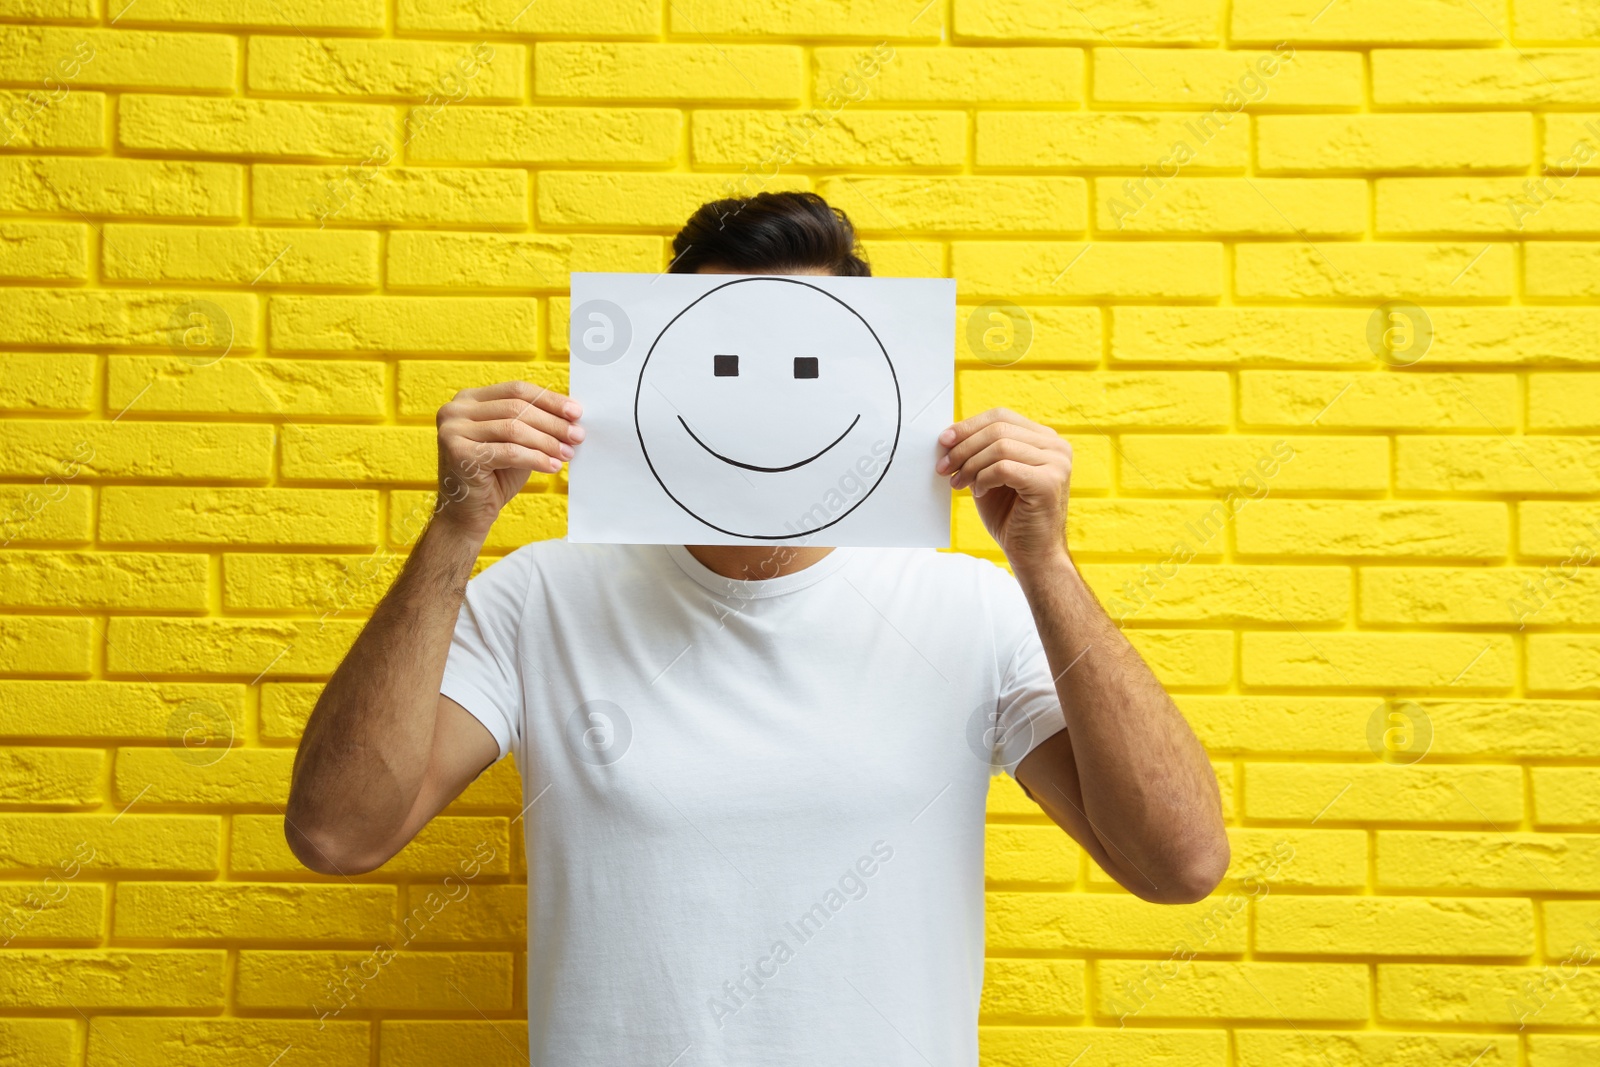 Photo of Man hiding emotions using card with drawn smiling face near yellow brick wall